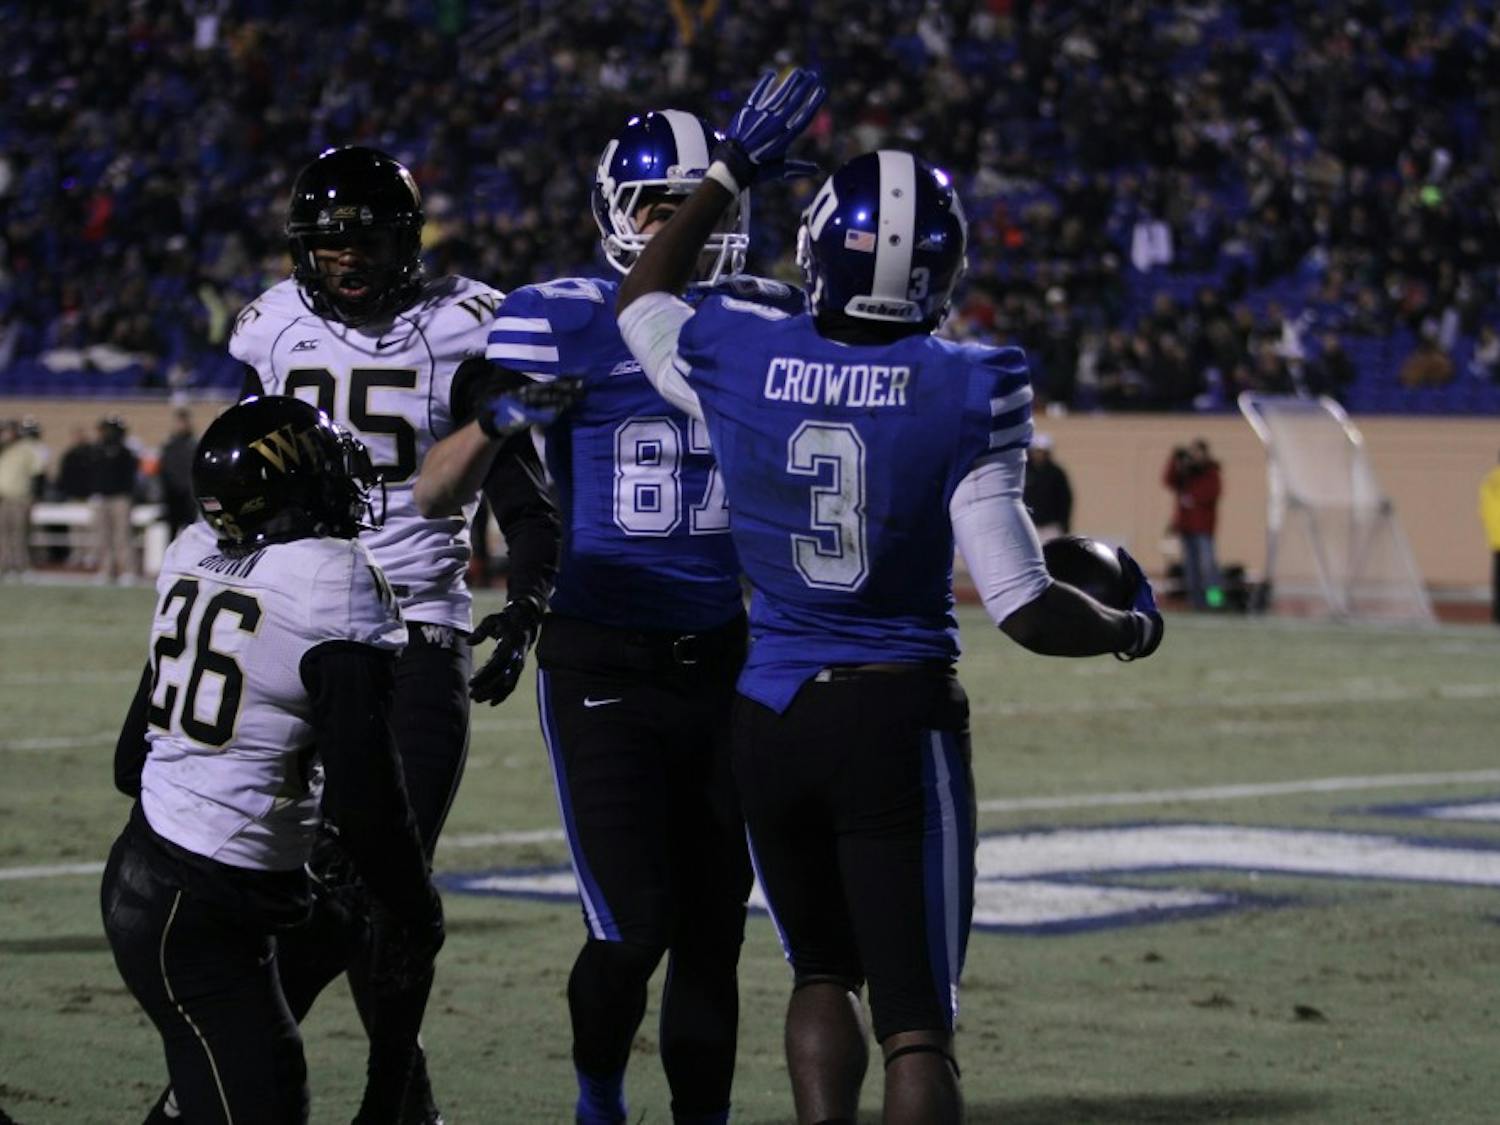 Senior Jamison Crowder hauled in another long touchdown for Duke Saturday night.